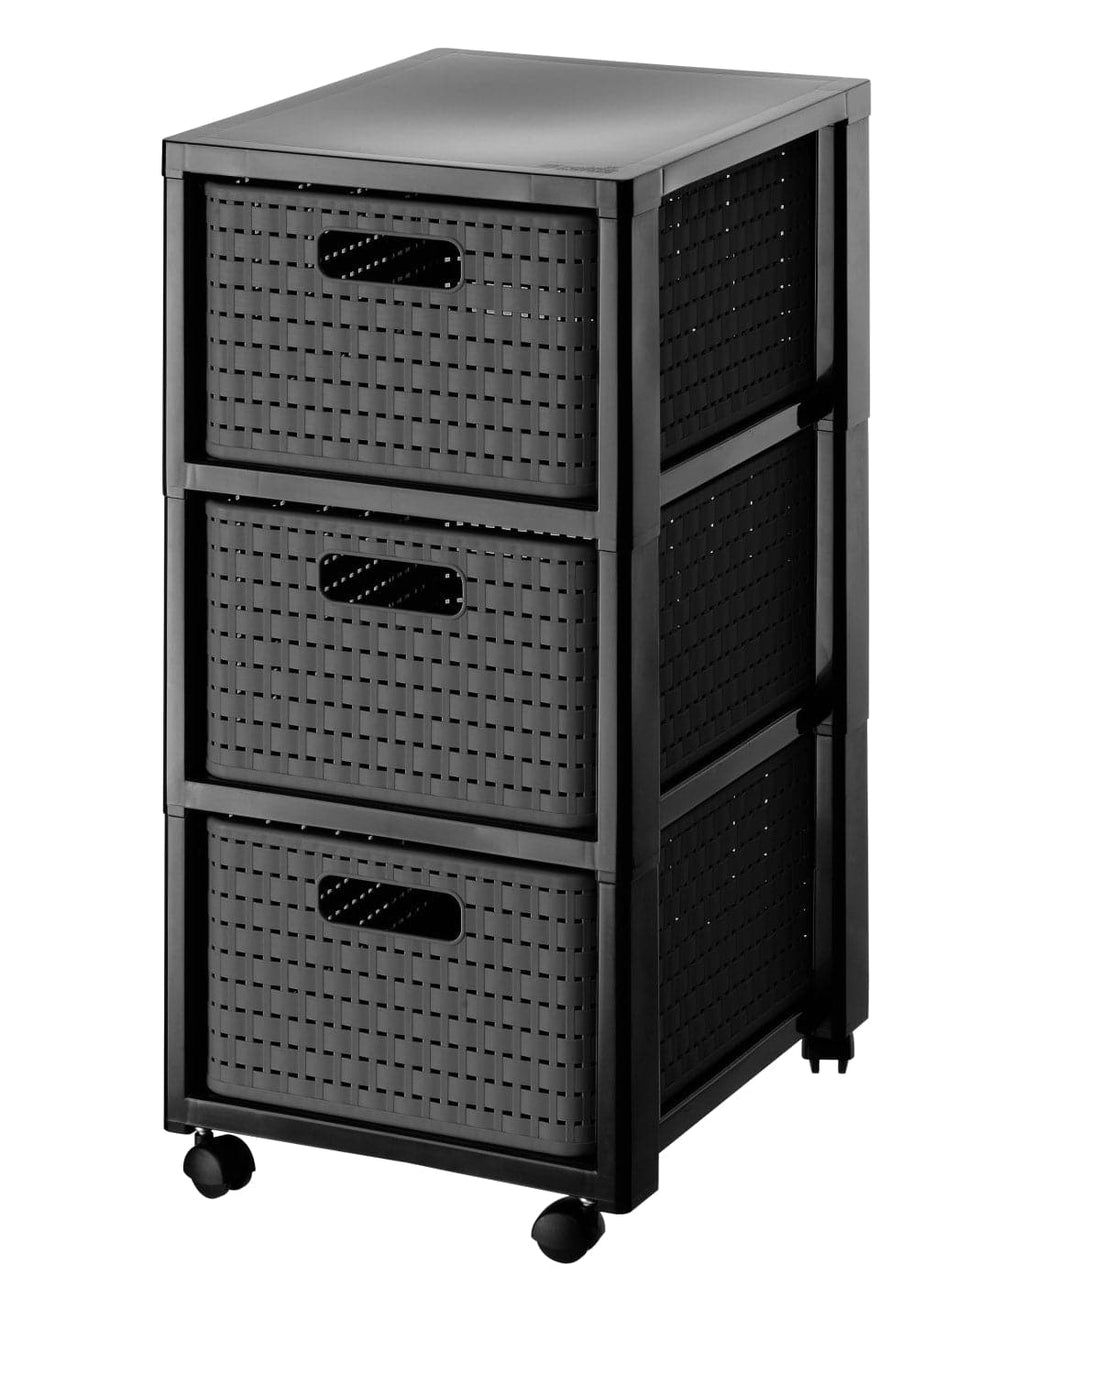 CHEST OF DRAWERS 3 DRAWERS 18LT REMOVABLE BRISEN 4 WHEELS ANTHRACITE 37,5X32,5X71,2CM - best price from Maltashopper.com BR410005882